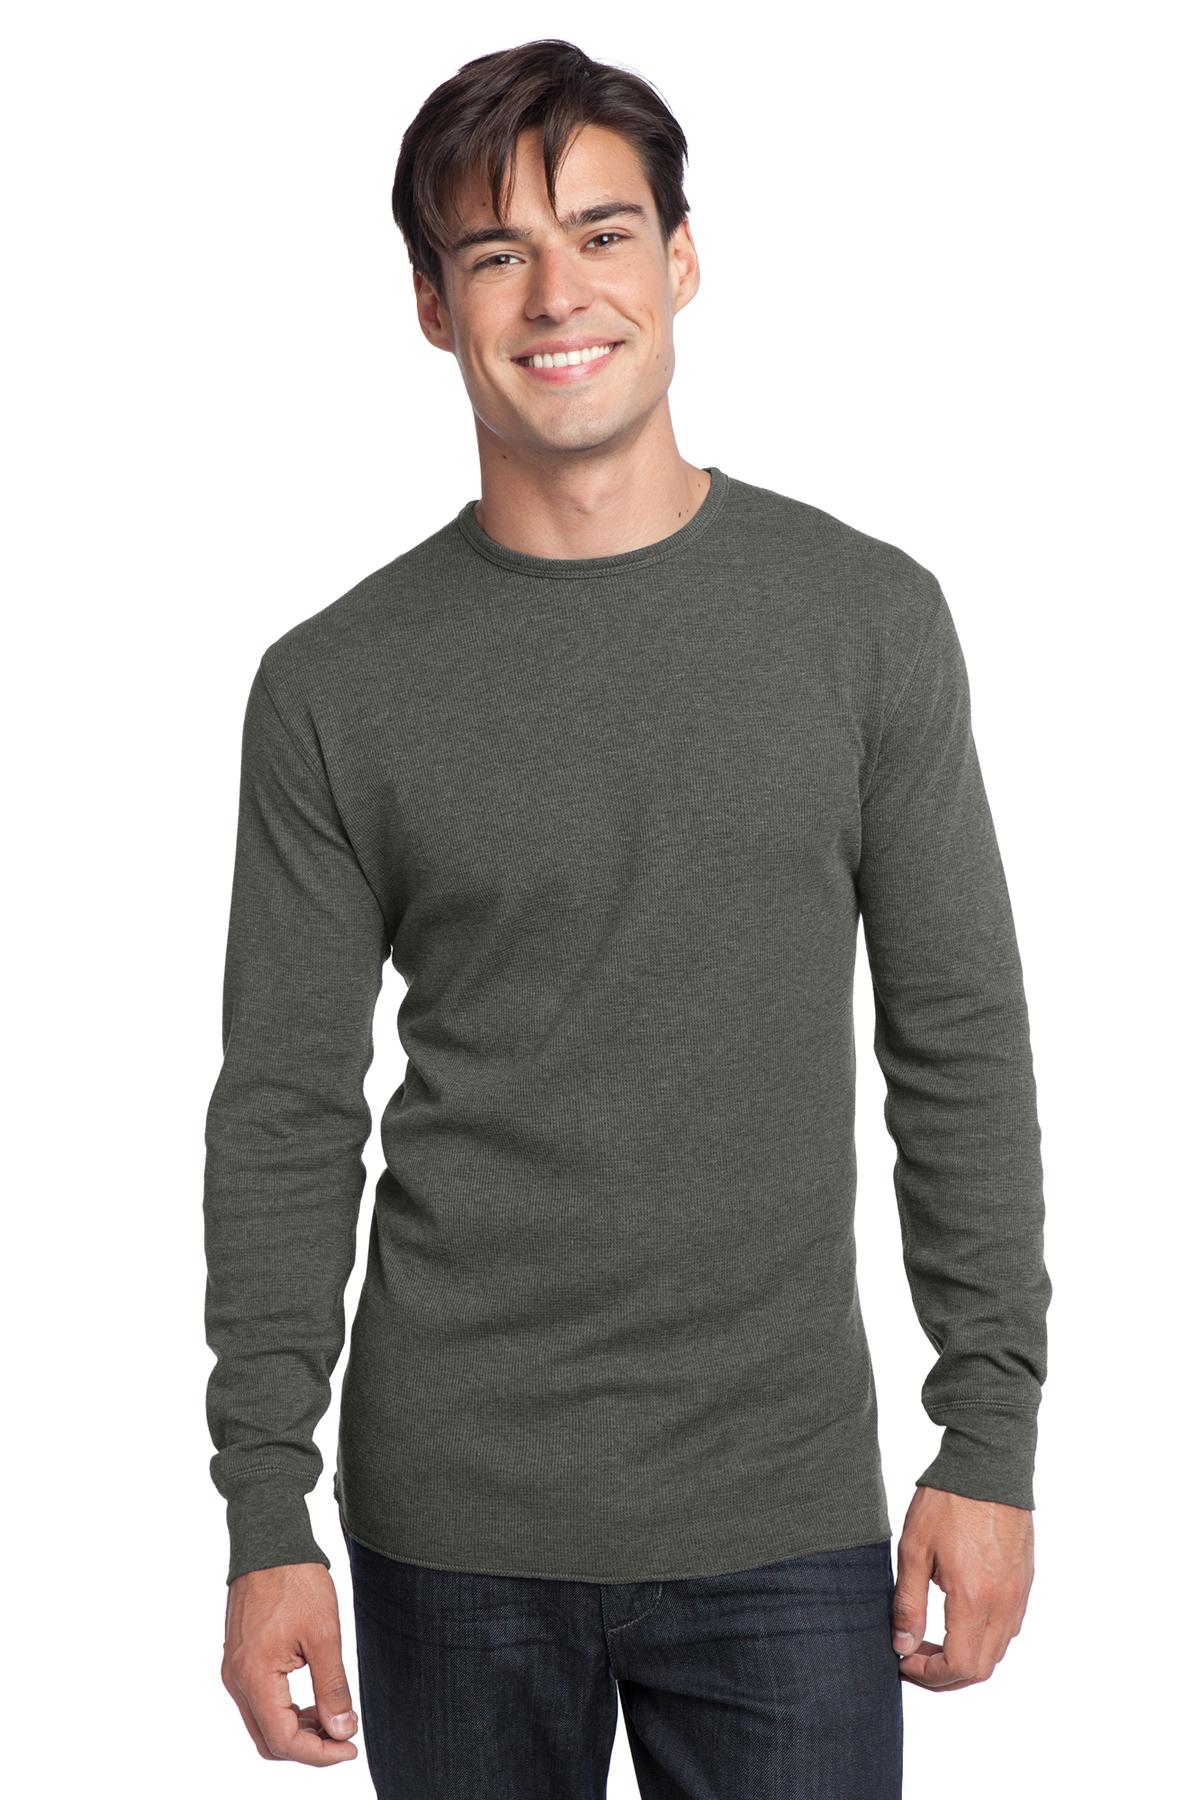 DT118 District? - Young Mens Long Sleeve Thermal